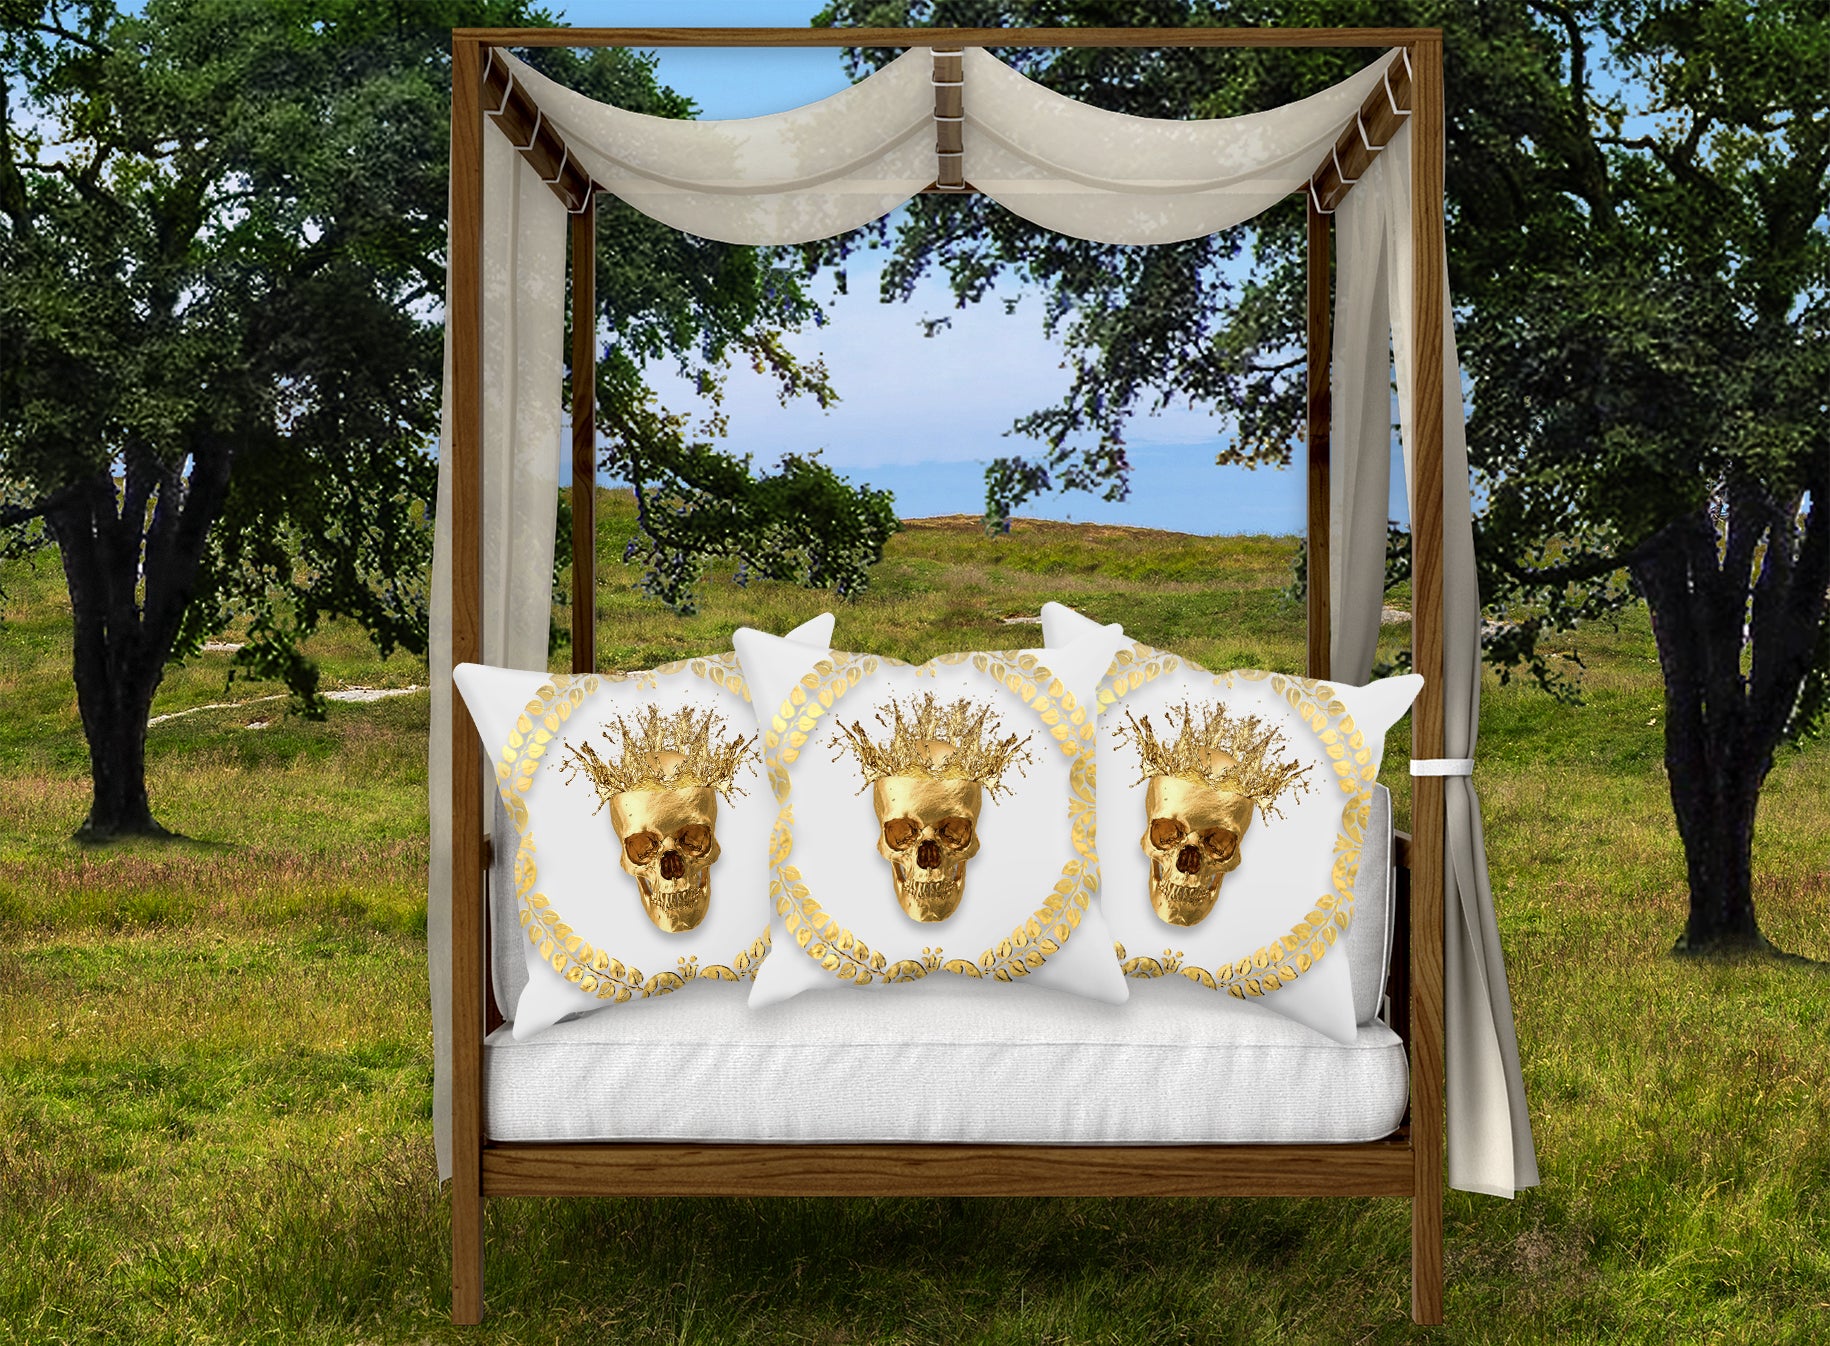 Satin and Suede Pillow Case-Cushion Cover-Gold SKULL-GOLD WREATH- Color Light GRAY